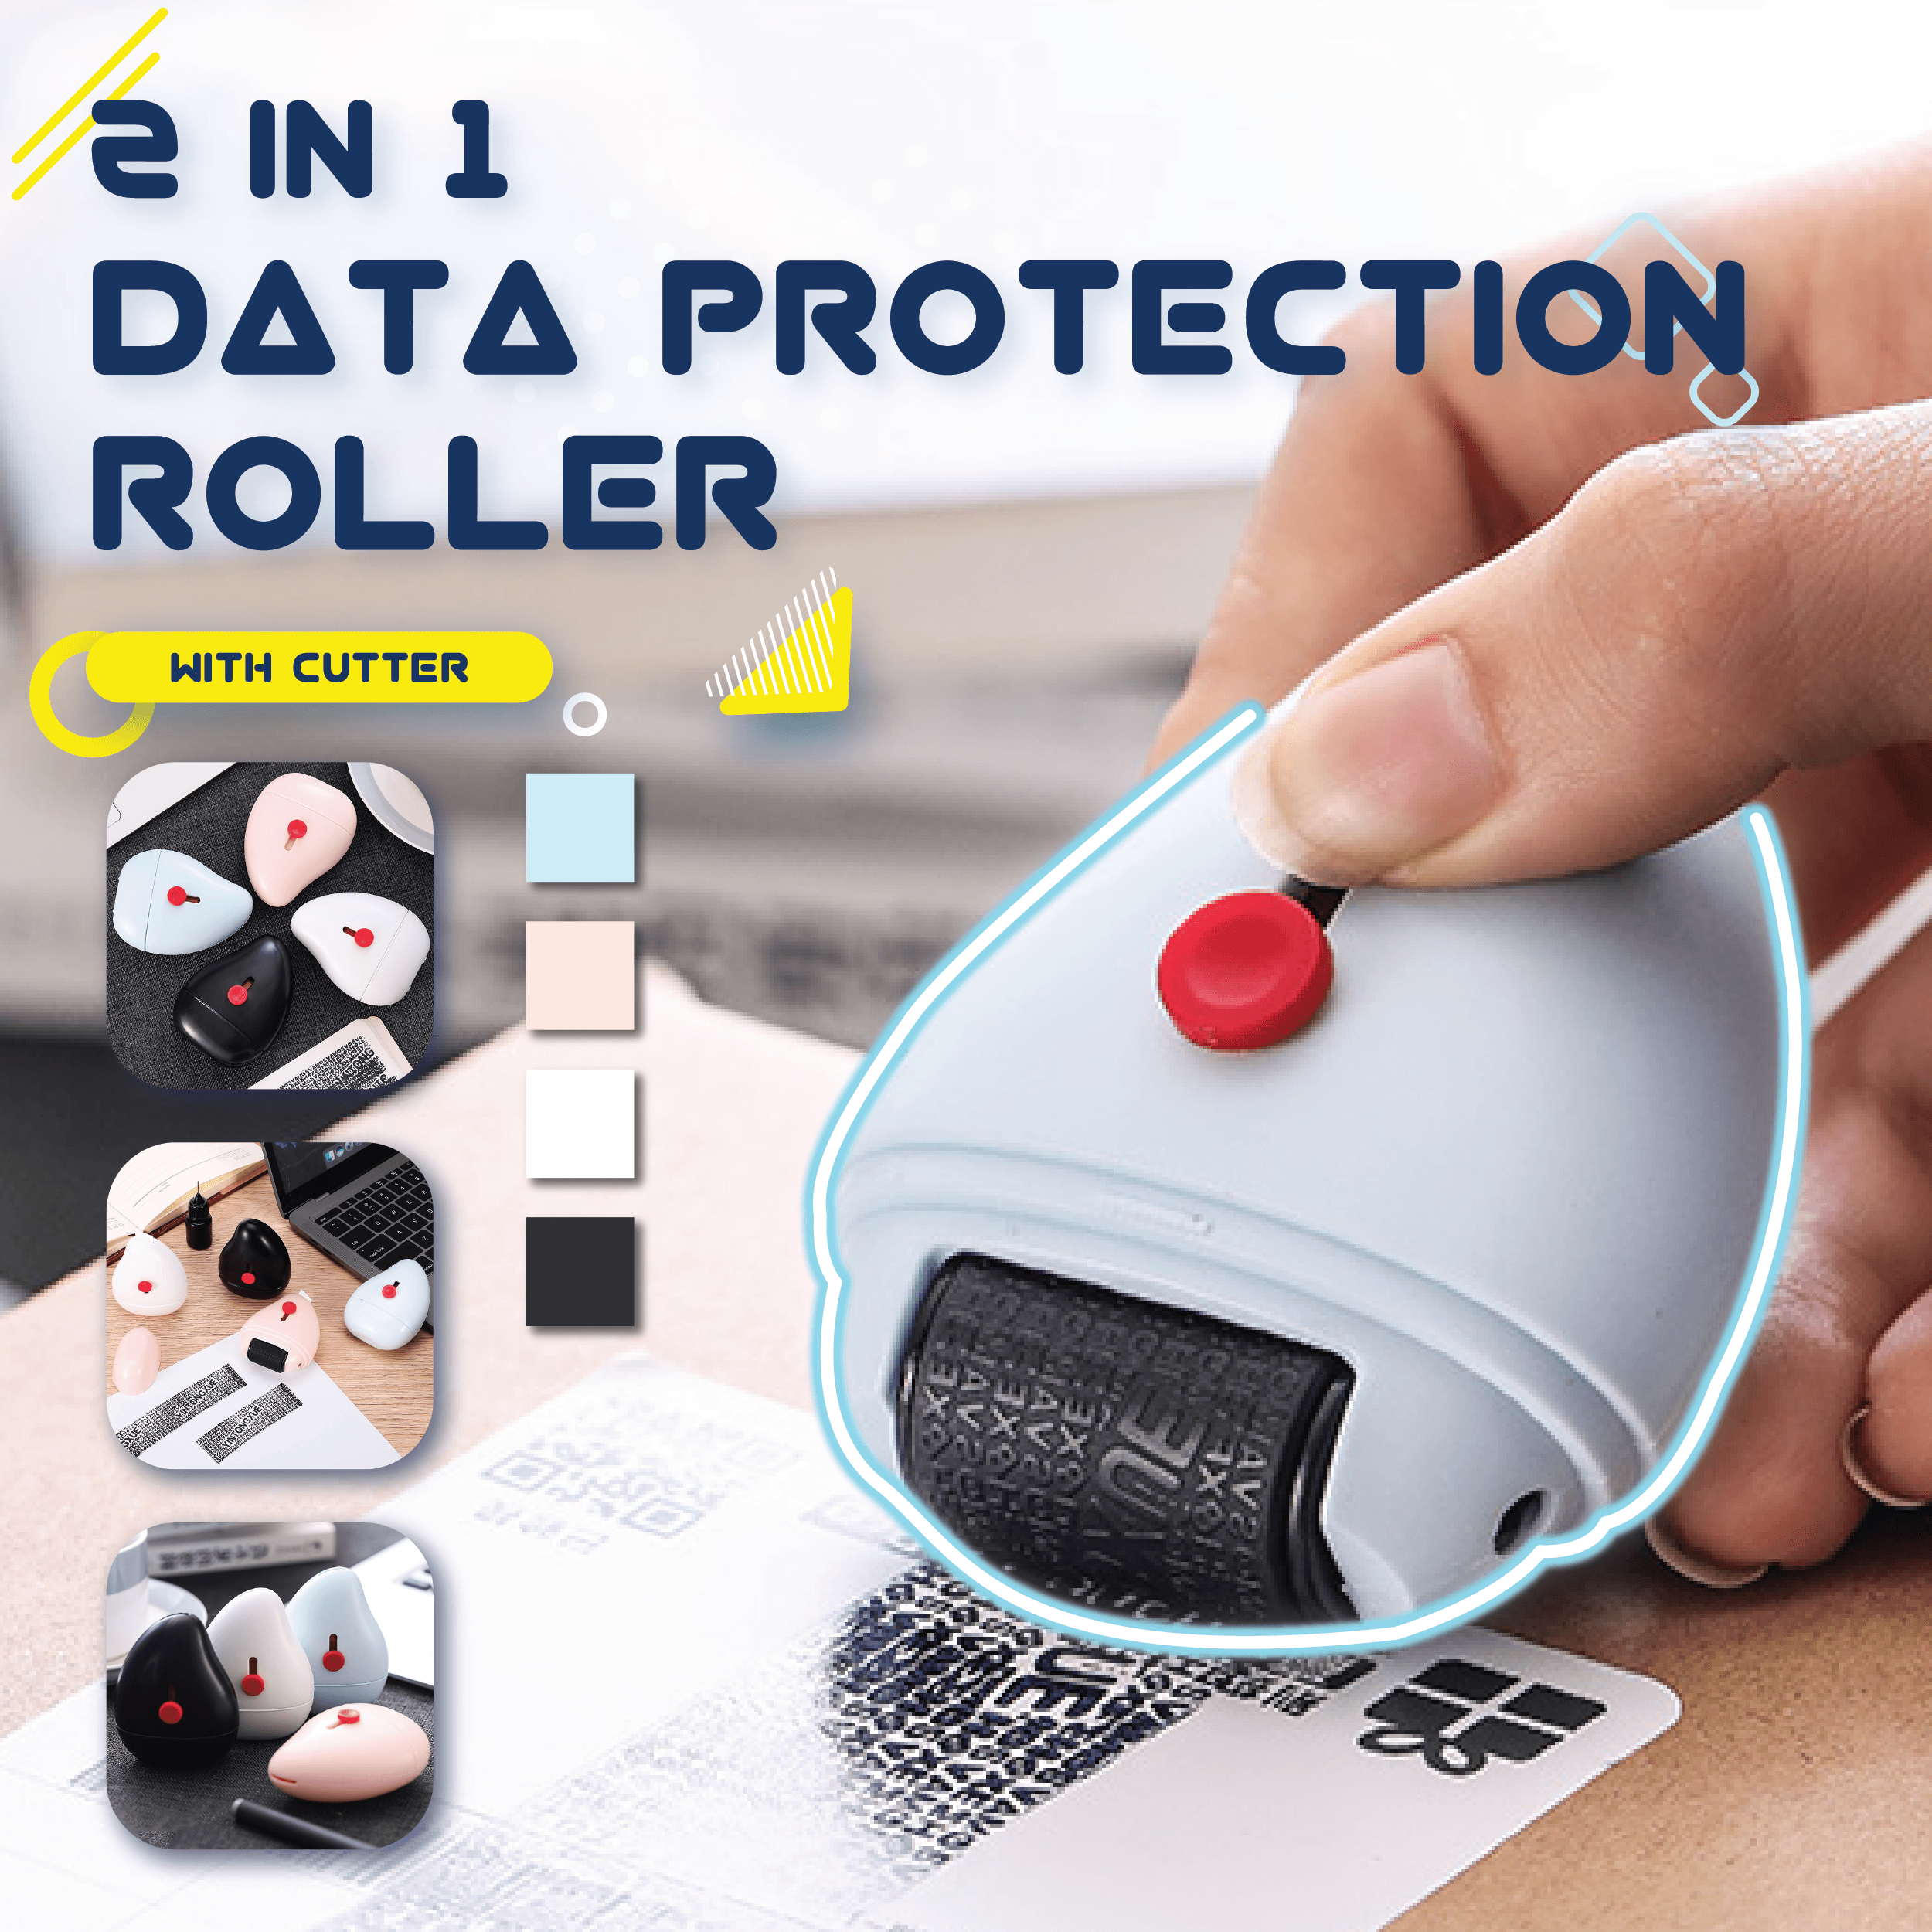 2-in-1 Data Protection Roller with Build-in Cutter